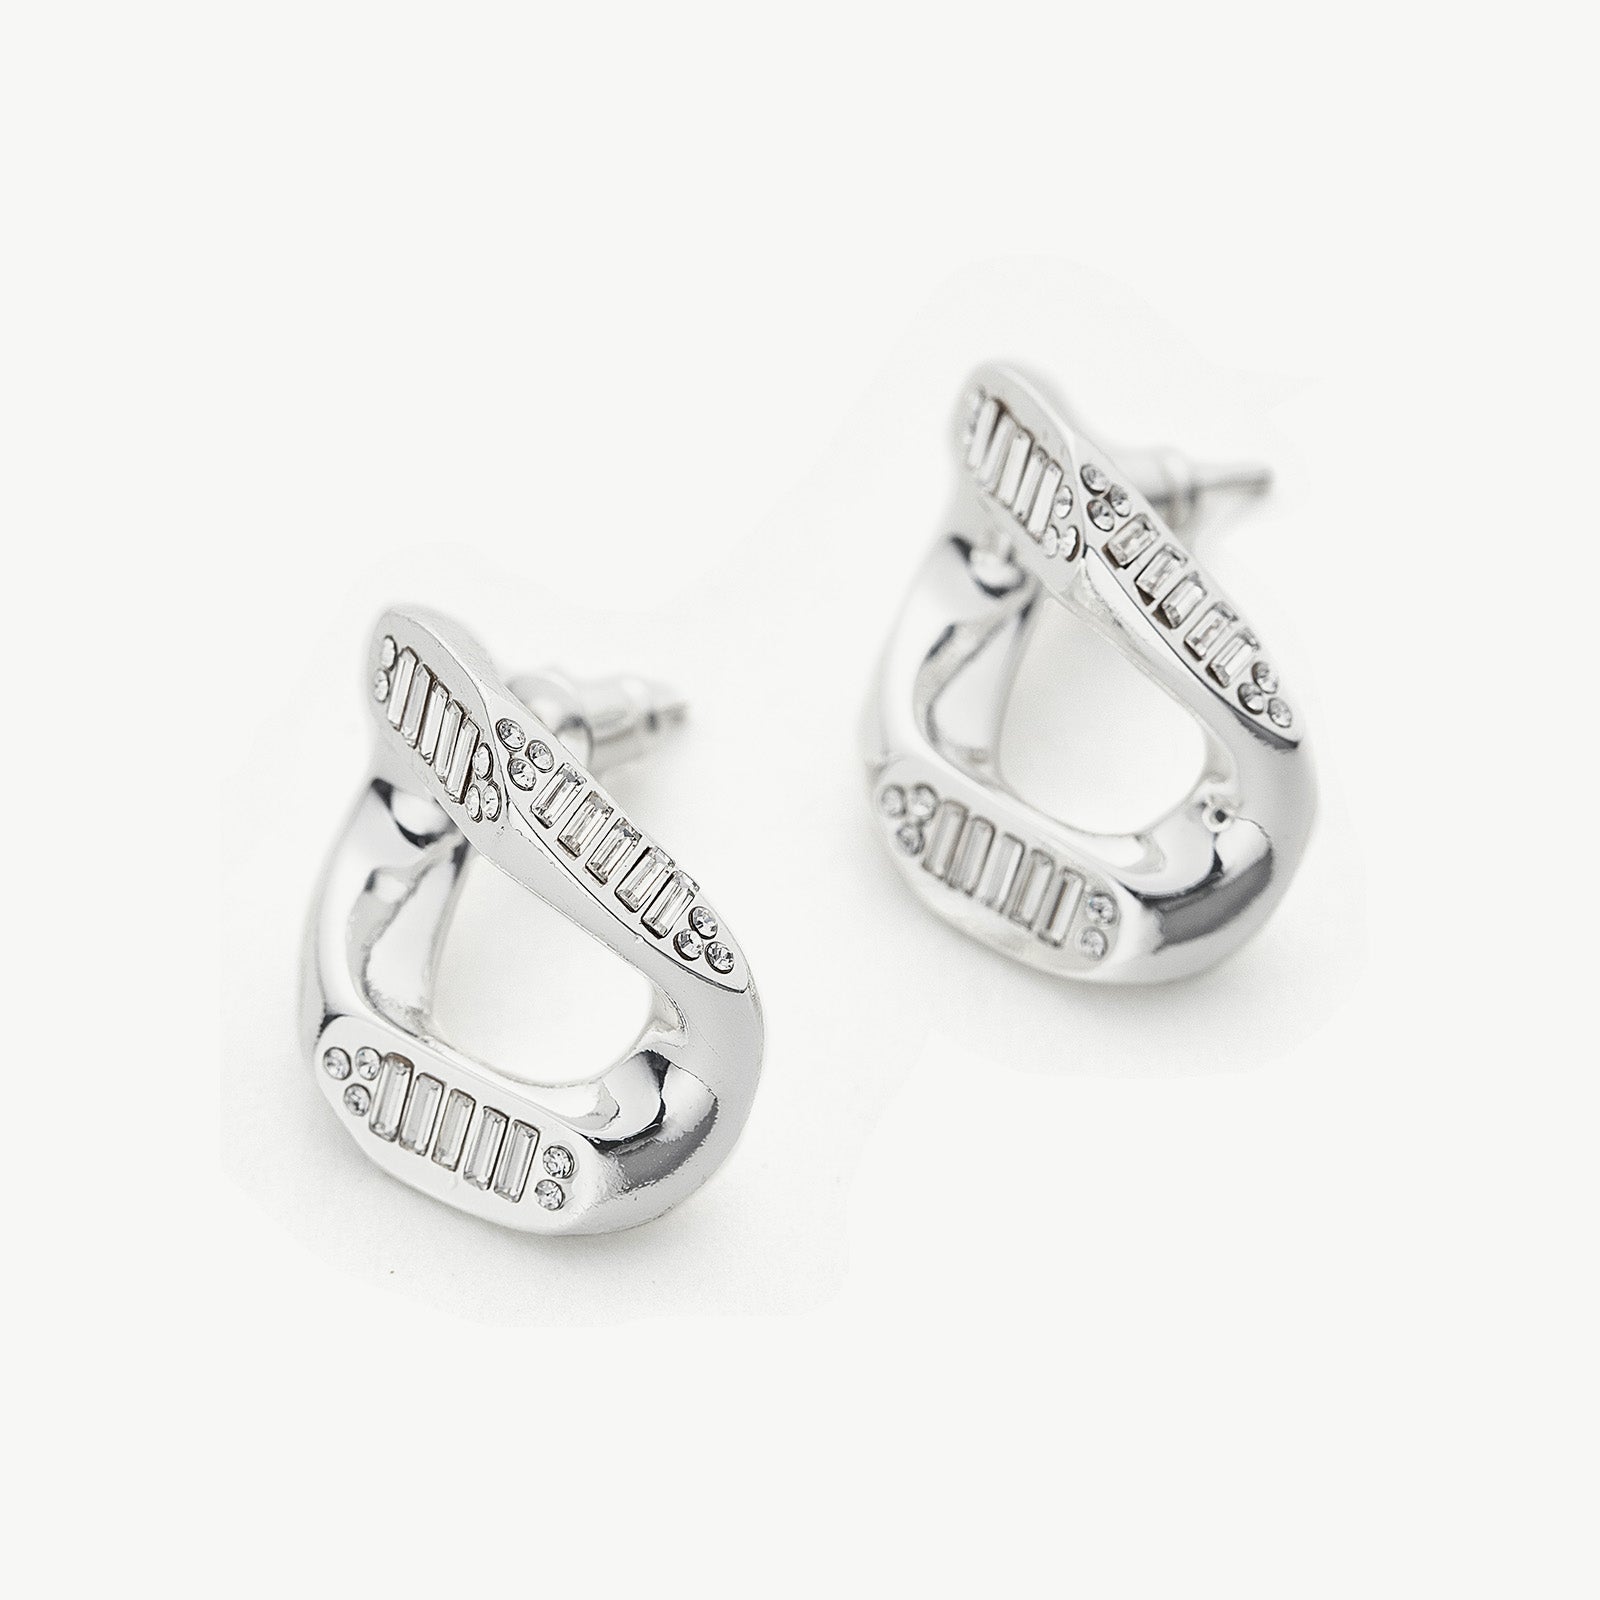 Silver Crystal Wavy Stud Earrings, featuring sparkling crystals in a wavy design for a lustrous and chic appearance.